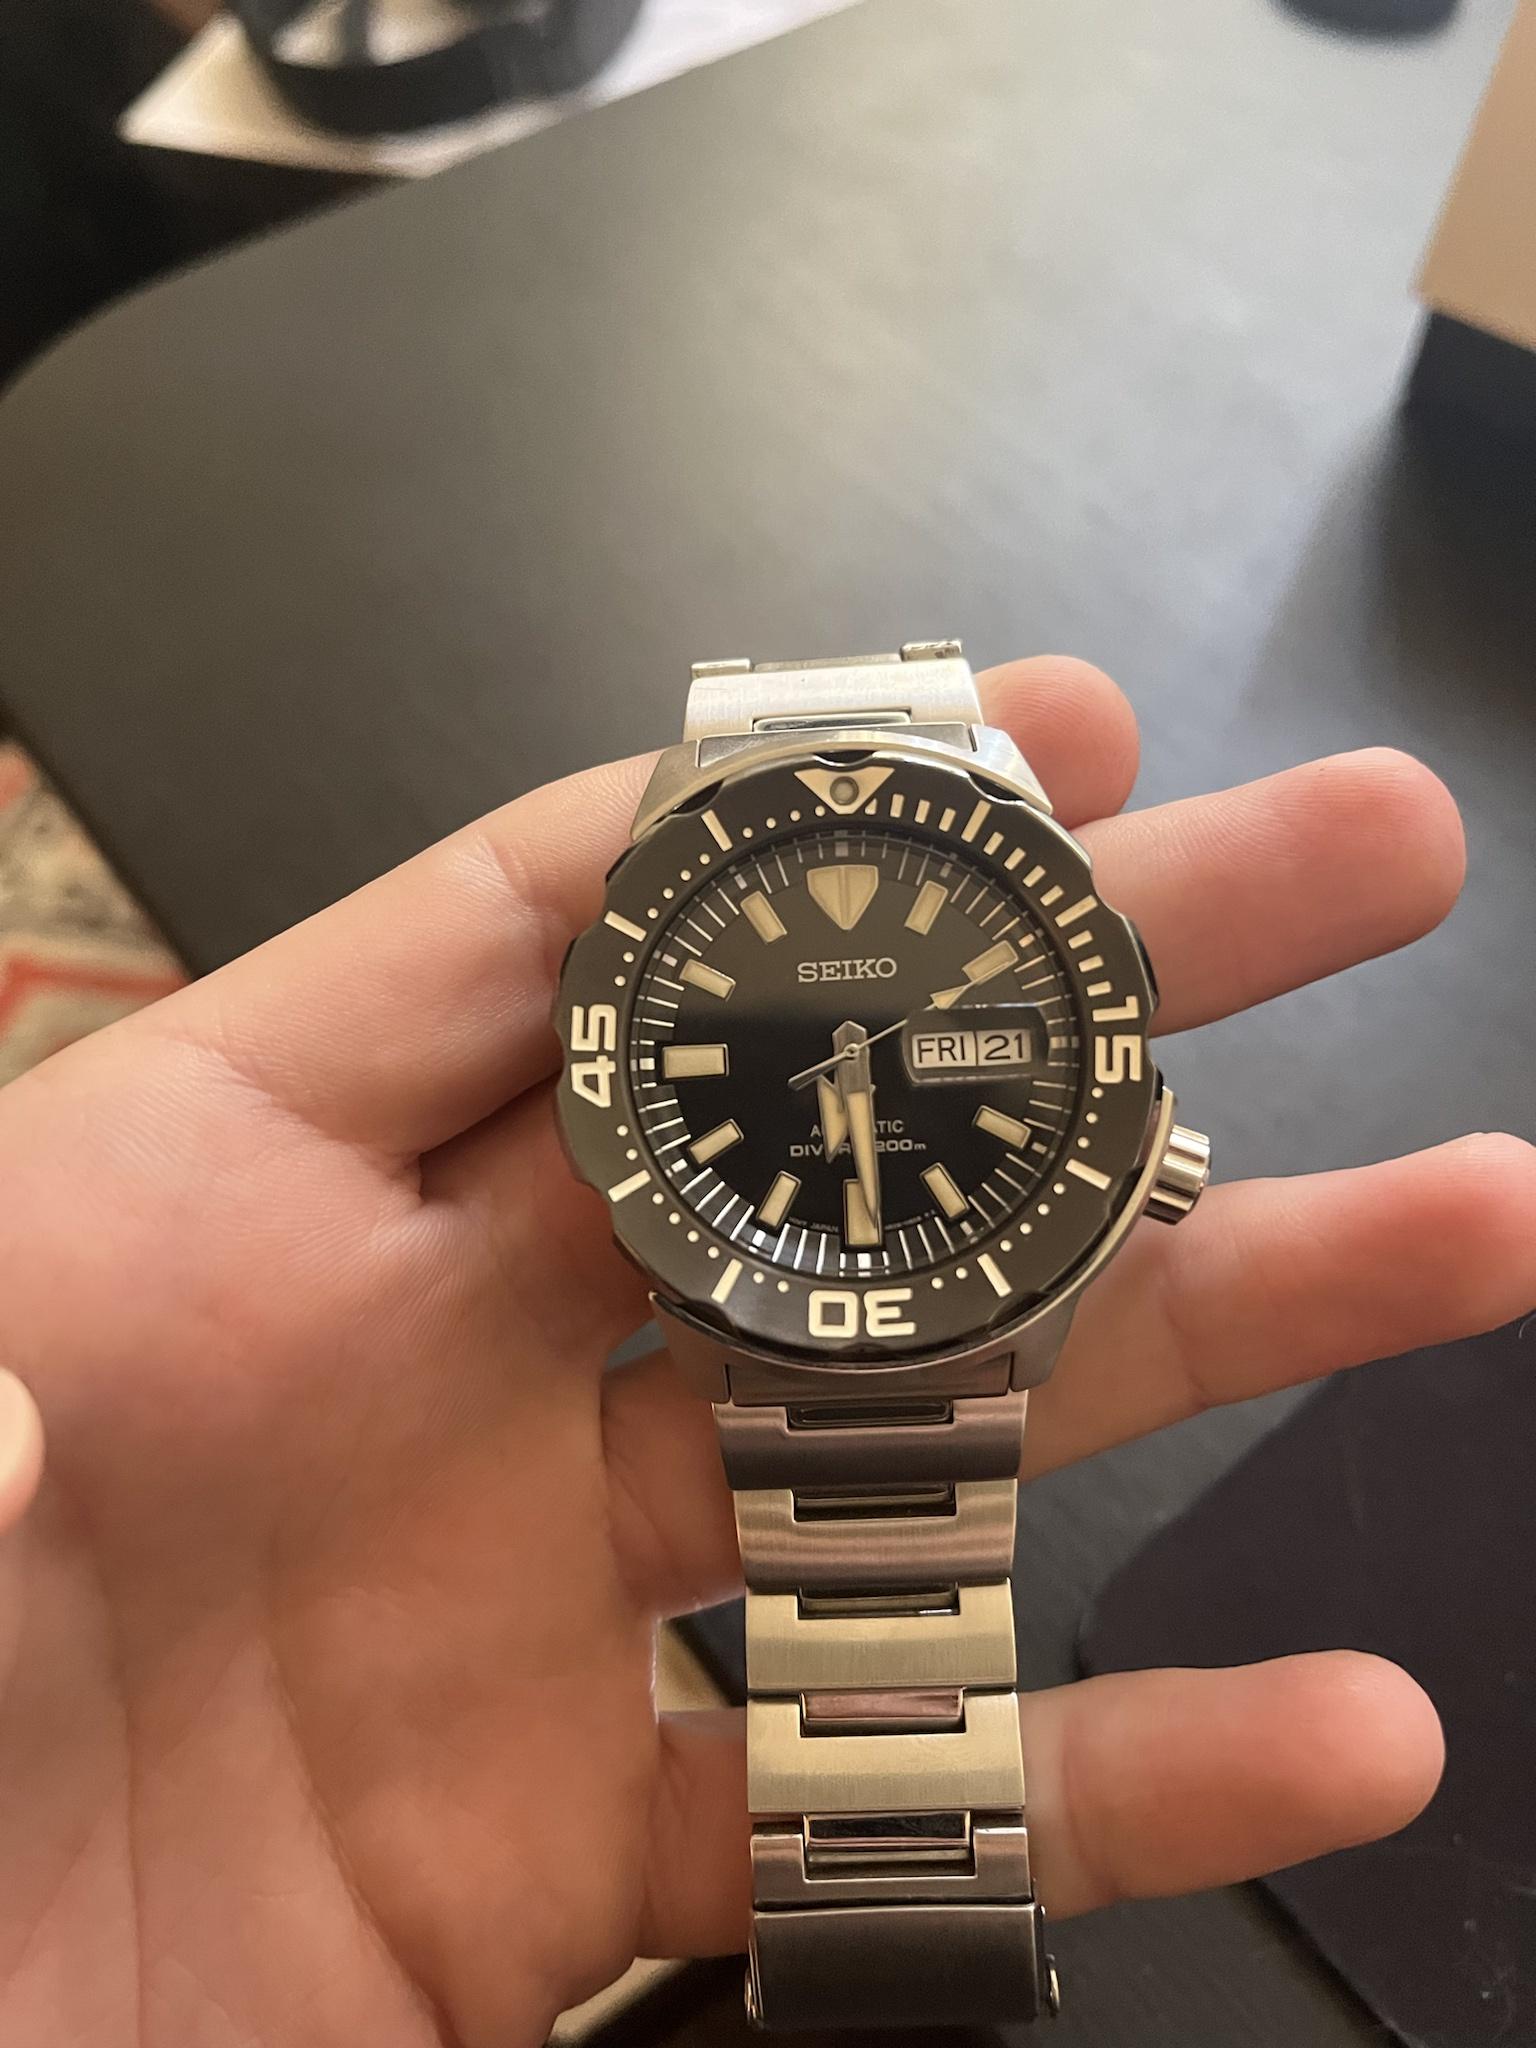 WTS] SEIKO MONSTER 4TH GEN SRPD27(WITH BRACELET)- $200 SHIPPED CONUS |  WatchCharts